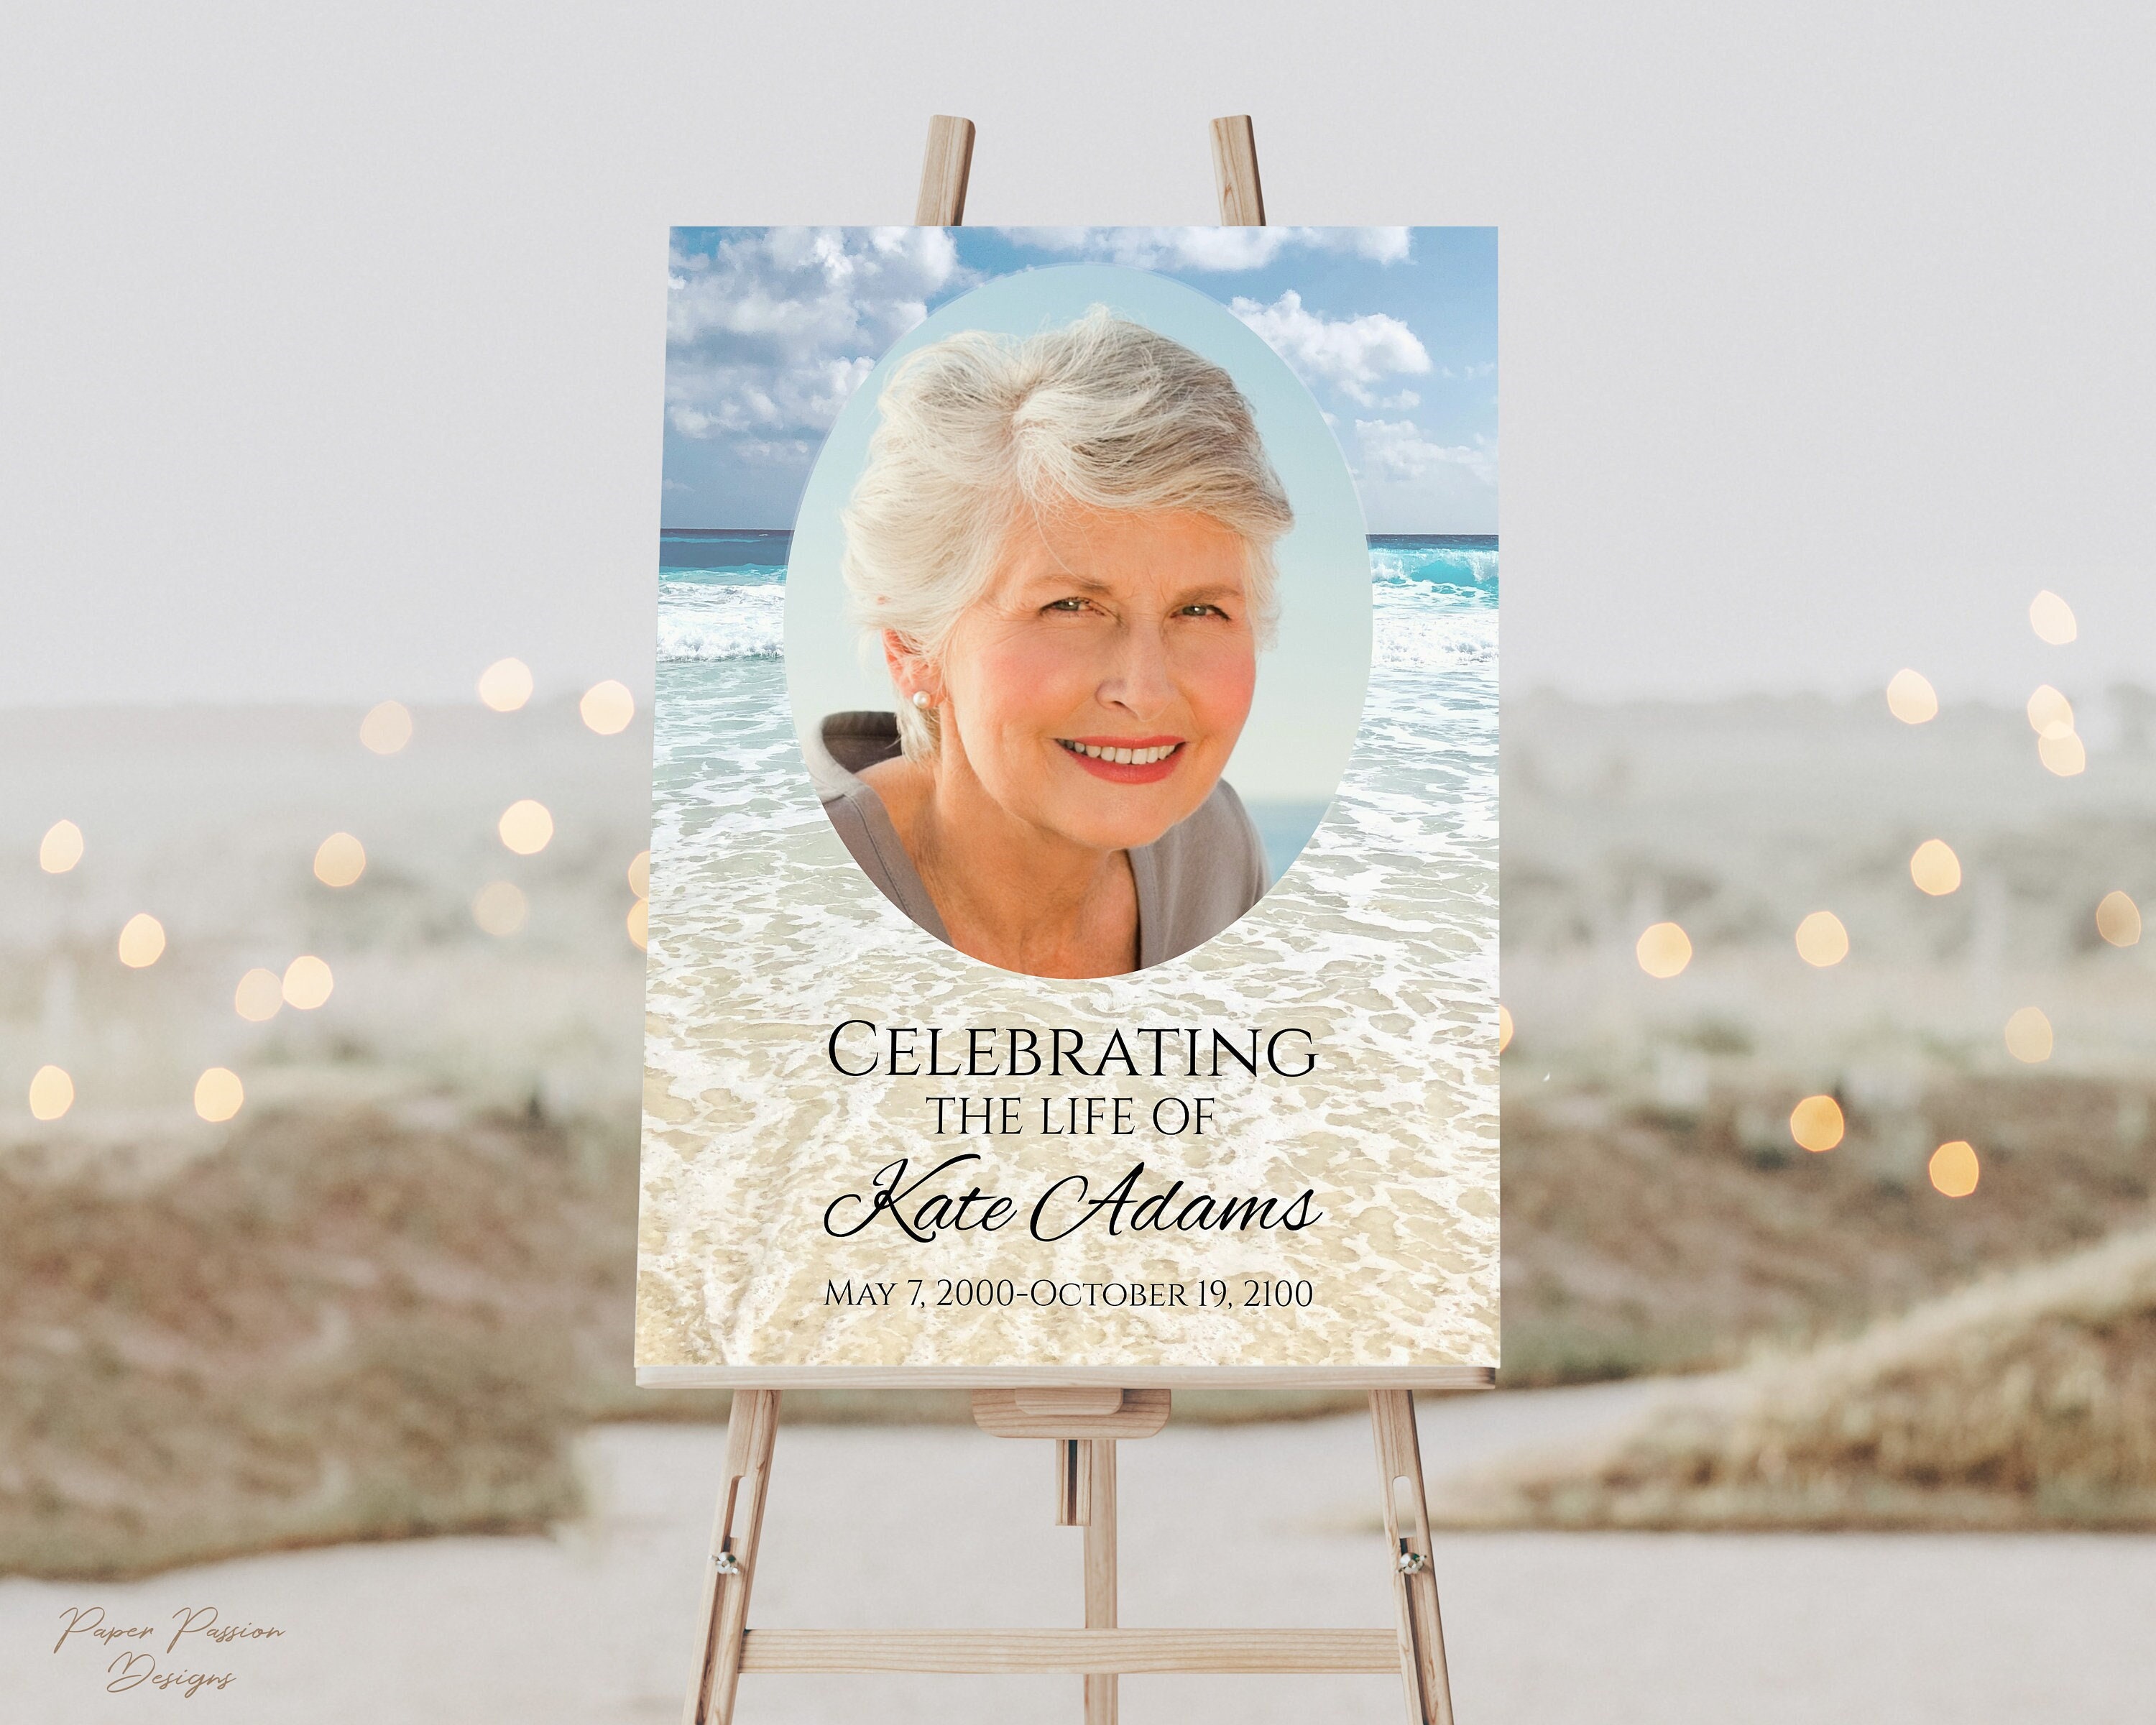 For this beach themed Celebration of Life, the memory table had vases with  beach sand and she…